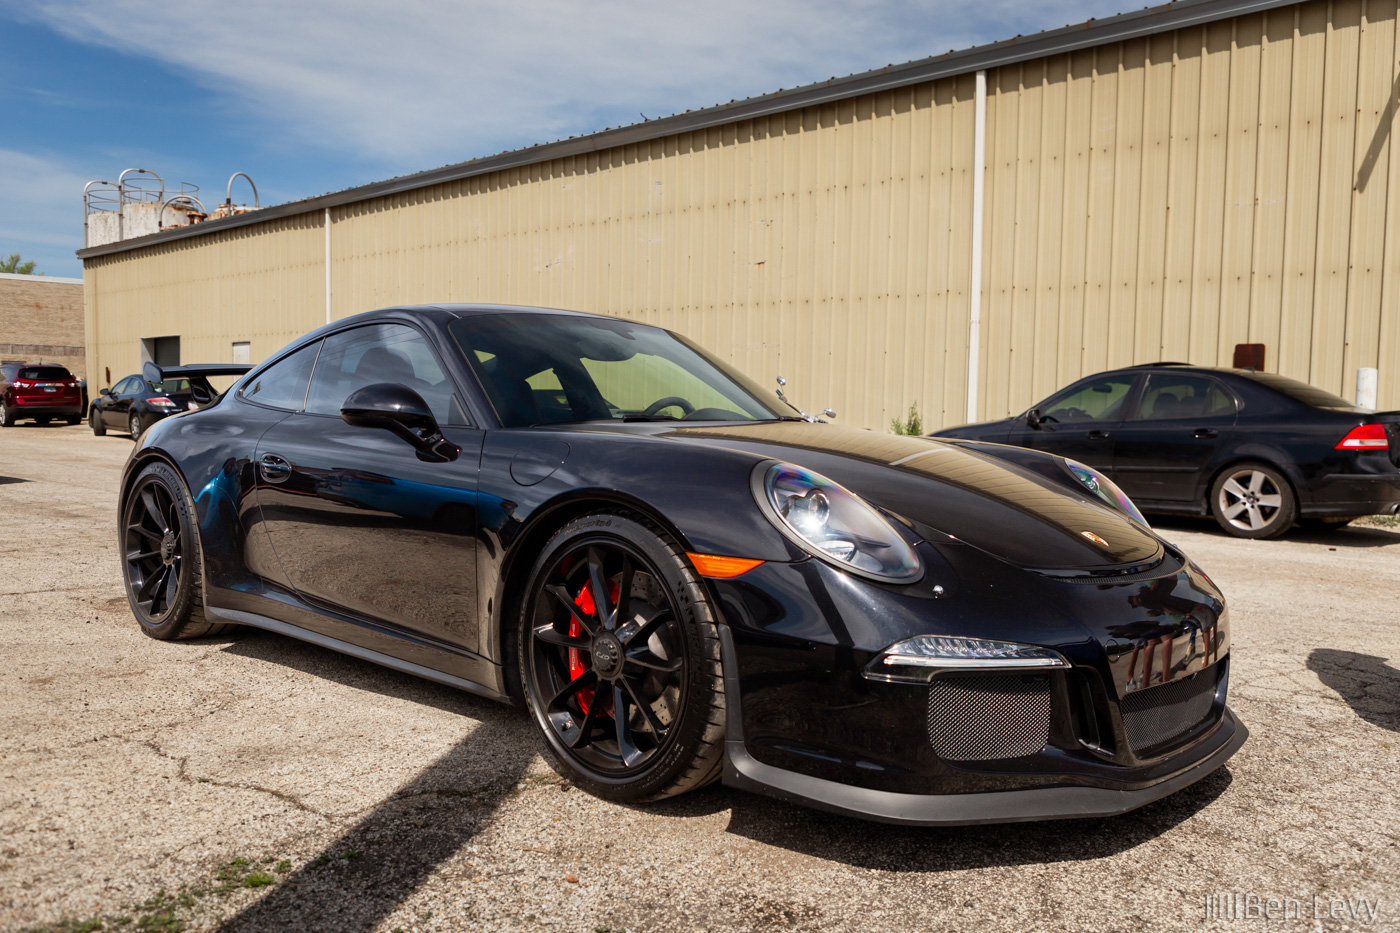 Black Porsche GT3 at Chitown Exotics Supercars for Charity